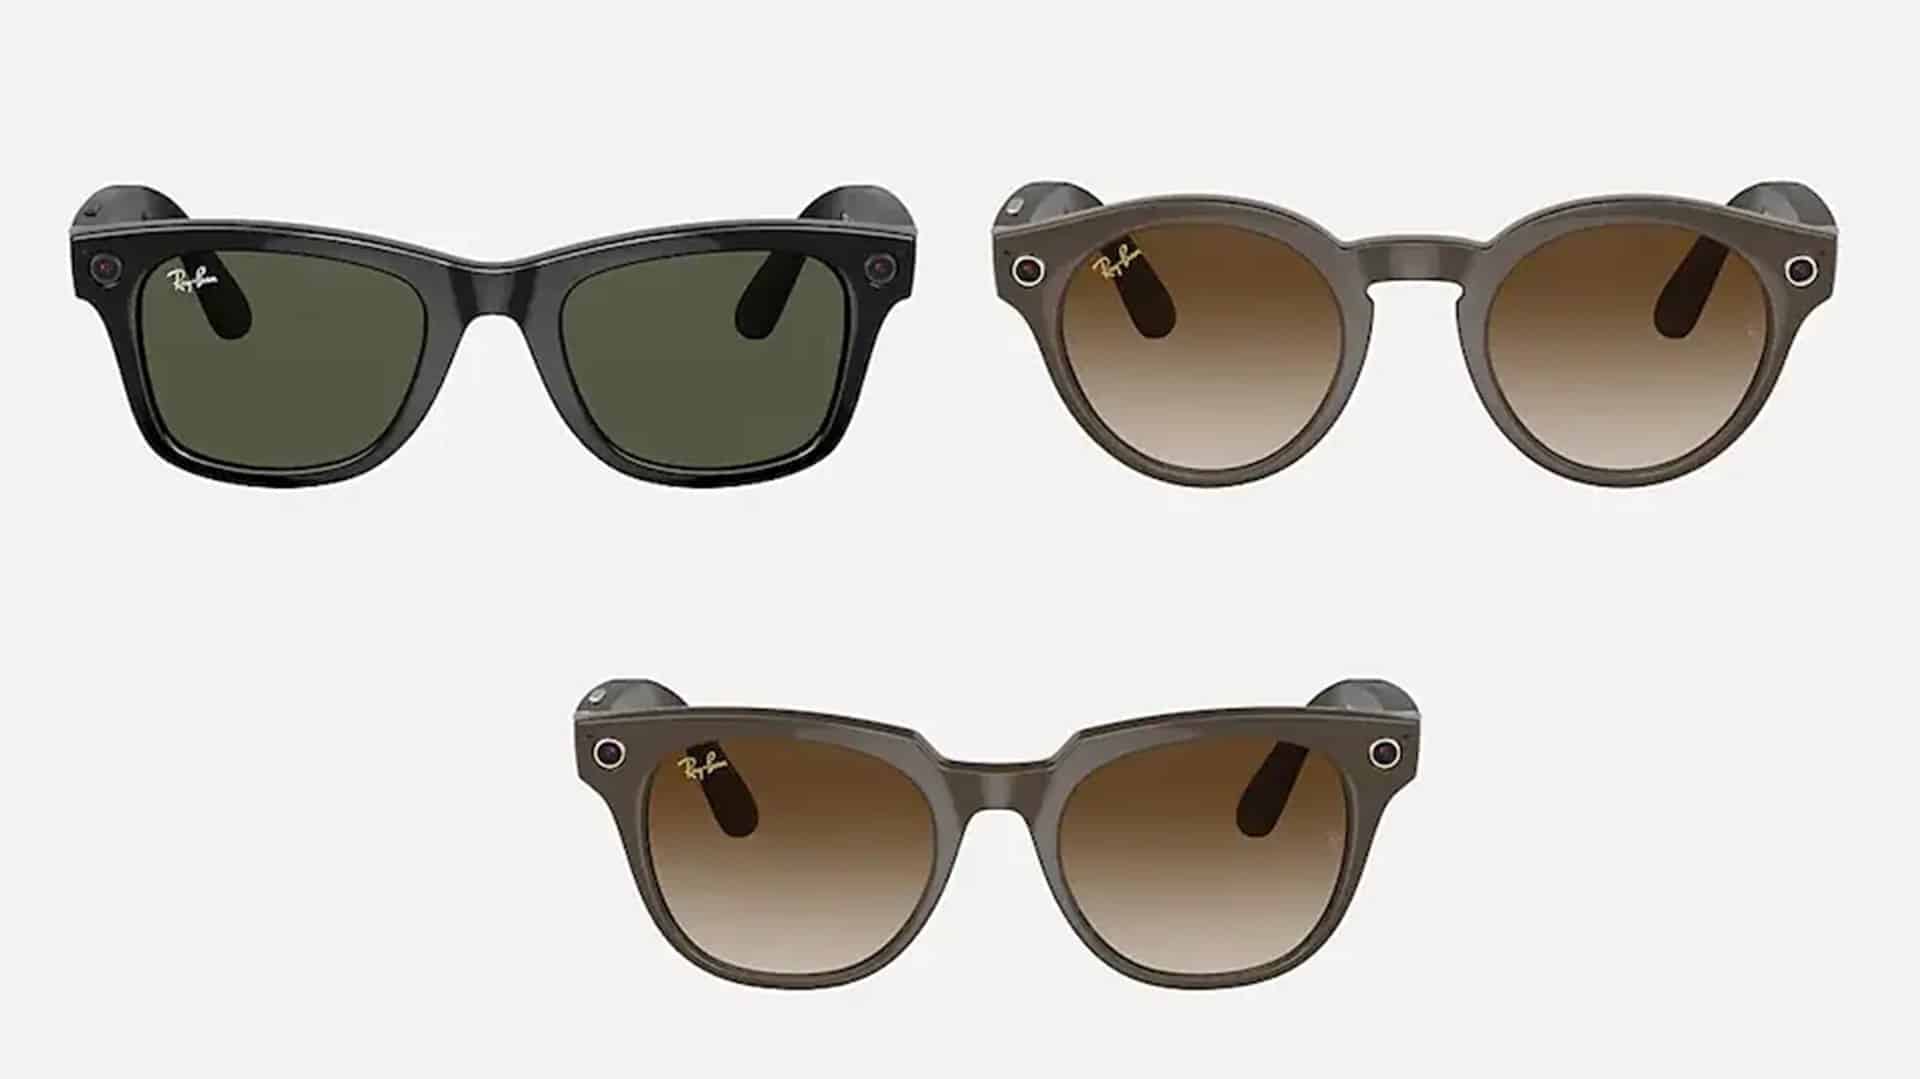 Facebook, Ray-Ban launch Smart Glasses with dual cameras, speakers